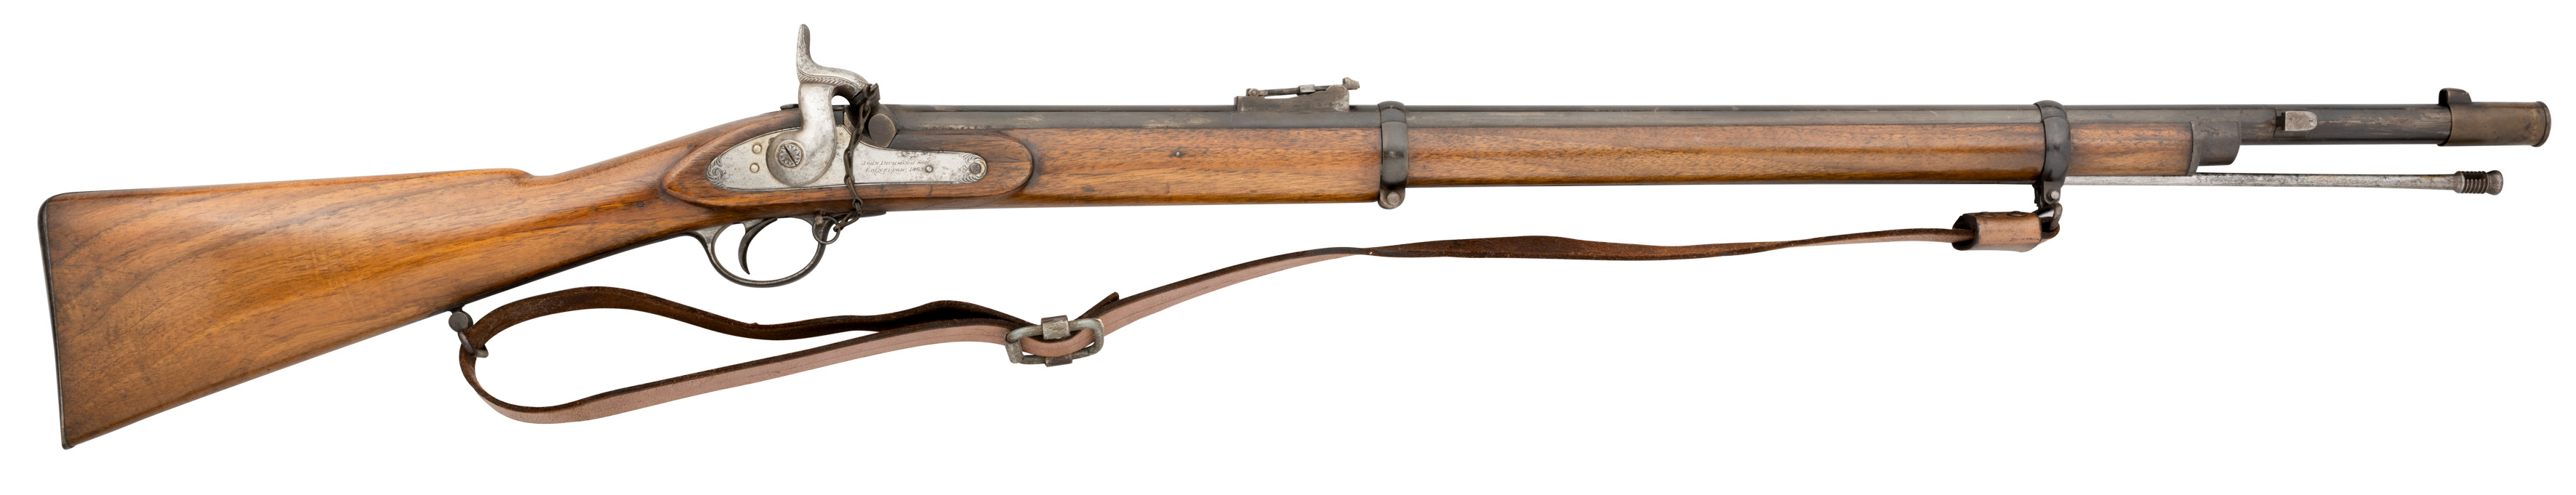 A .577 CALIBRE PERCUSSION MILITARY RIFLE BY JOHN DICKSON AND SONS